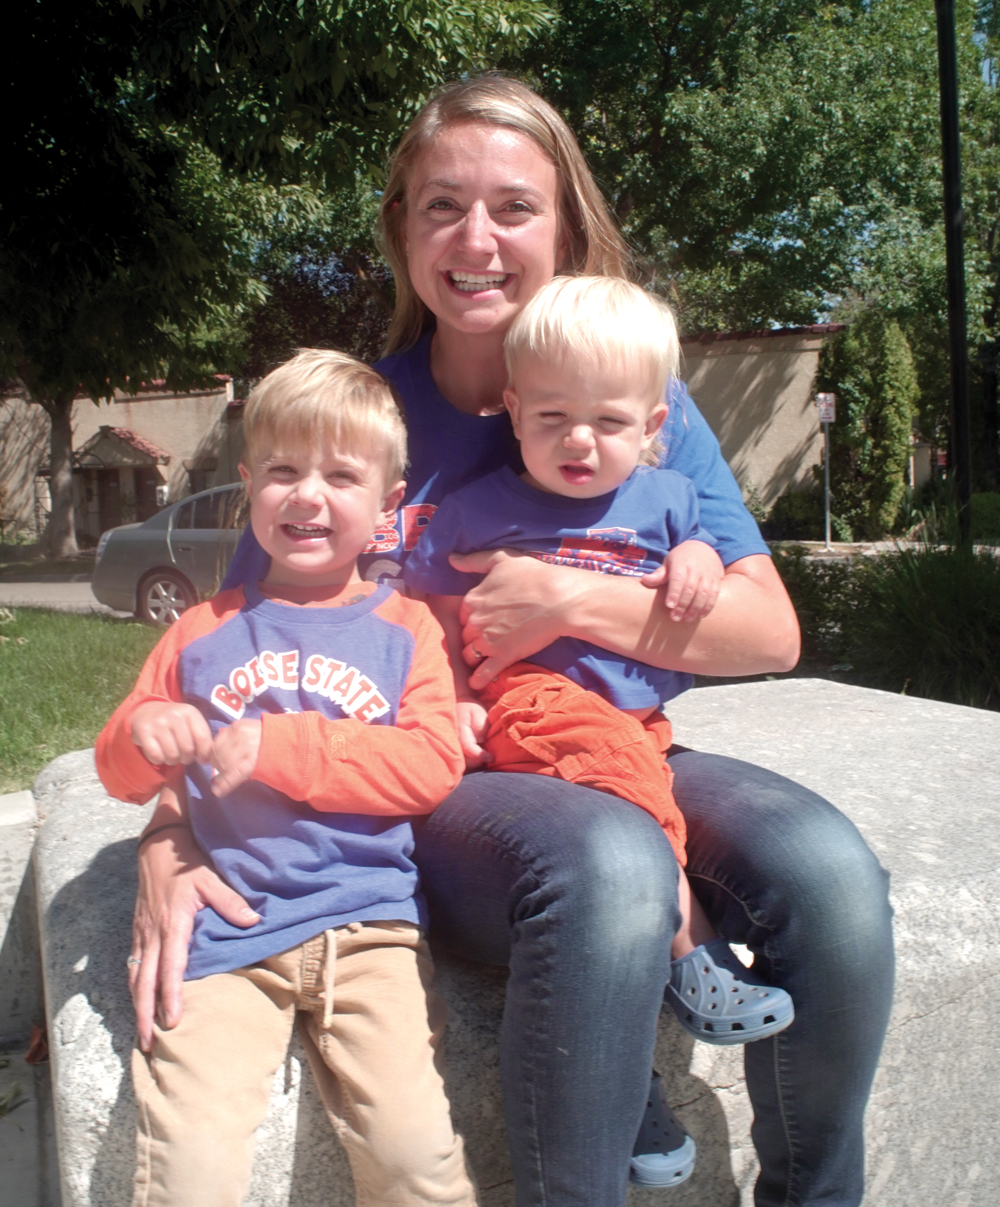 Jillian Moroney and her two young boys